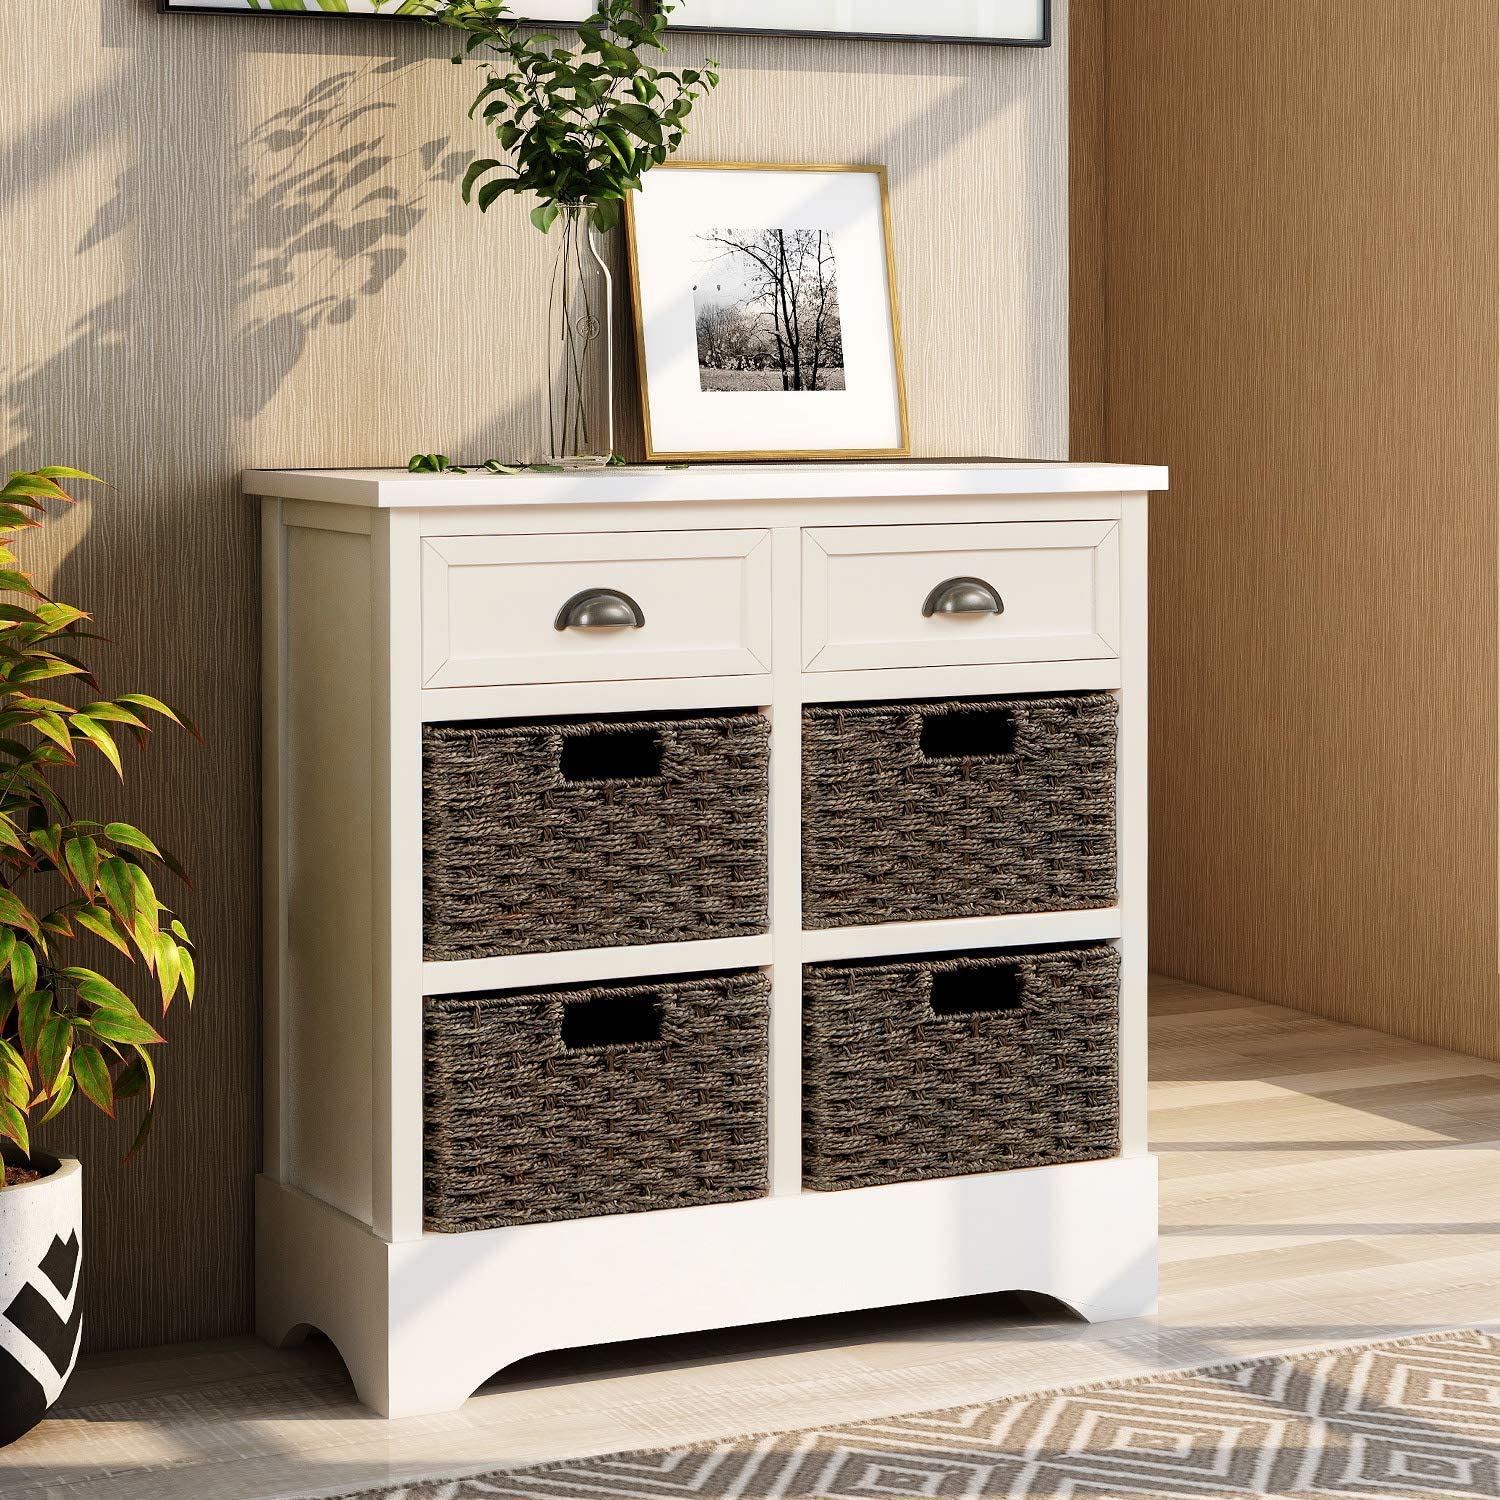 2 Drawers and 1 Shelf Cabinet White S7-BSB-010-CA Living Room Entryway Console Sideboard Table SDHYL Chest Storage Cabinet Kitchen Cupboard Organizer